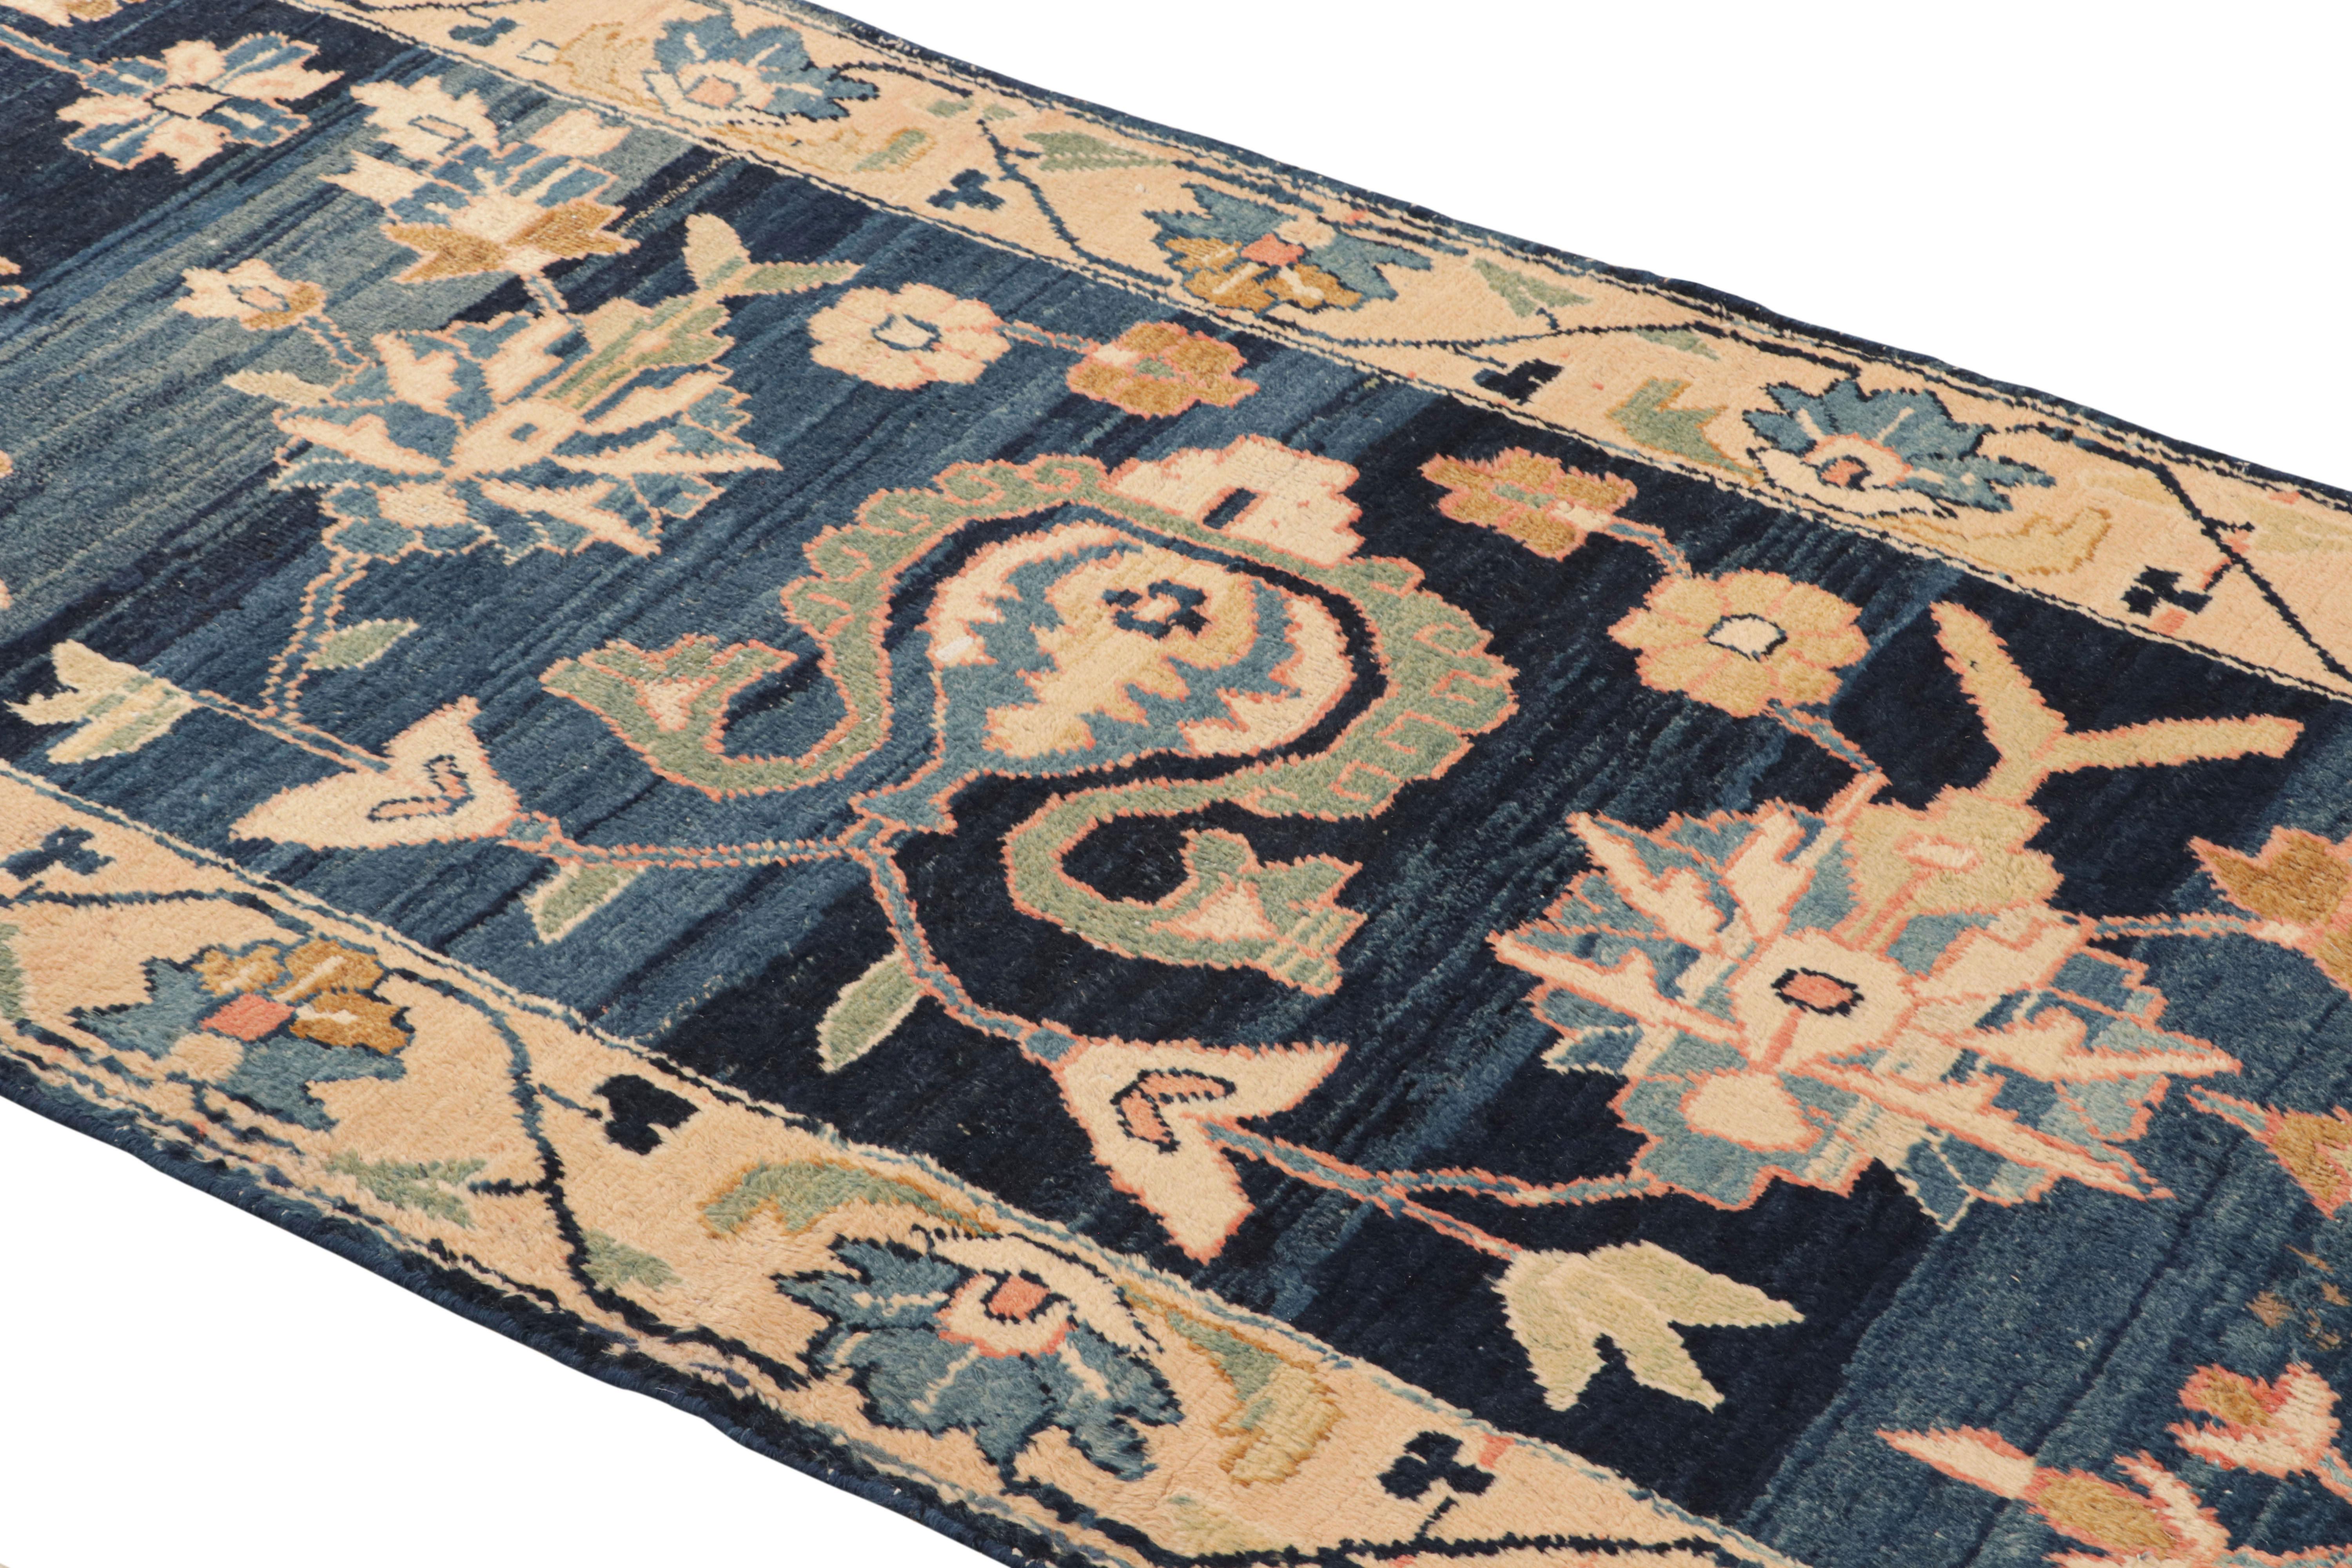 This vintage midcentury Persian rug, circa 1950-1960 measures 3’5 x 13’8 and features a Mahal rug design of collectible renown. As with most Mahal designs, this runner has a coarse weave, handmade in wool with striking blue and yellow complemented